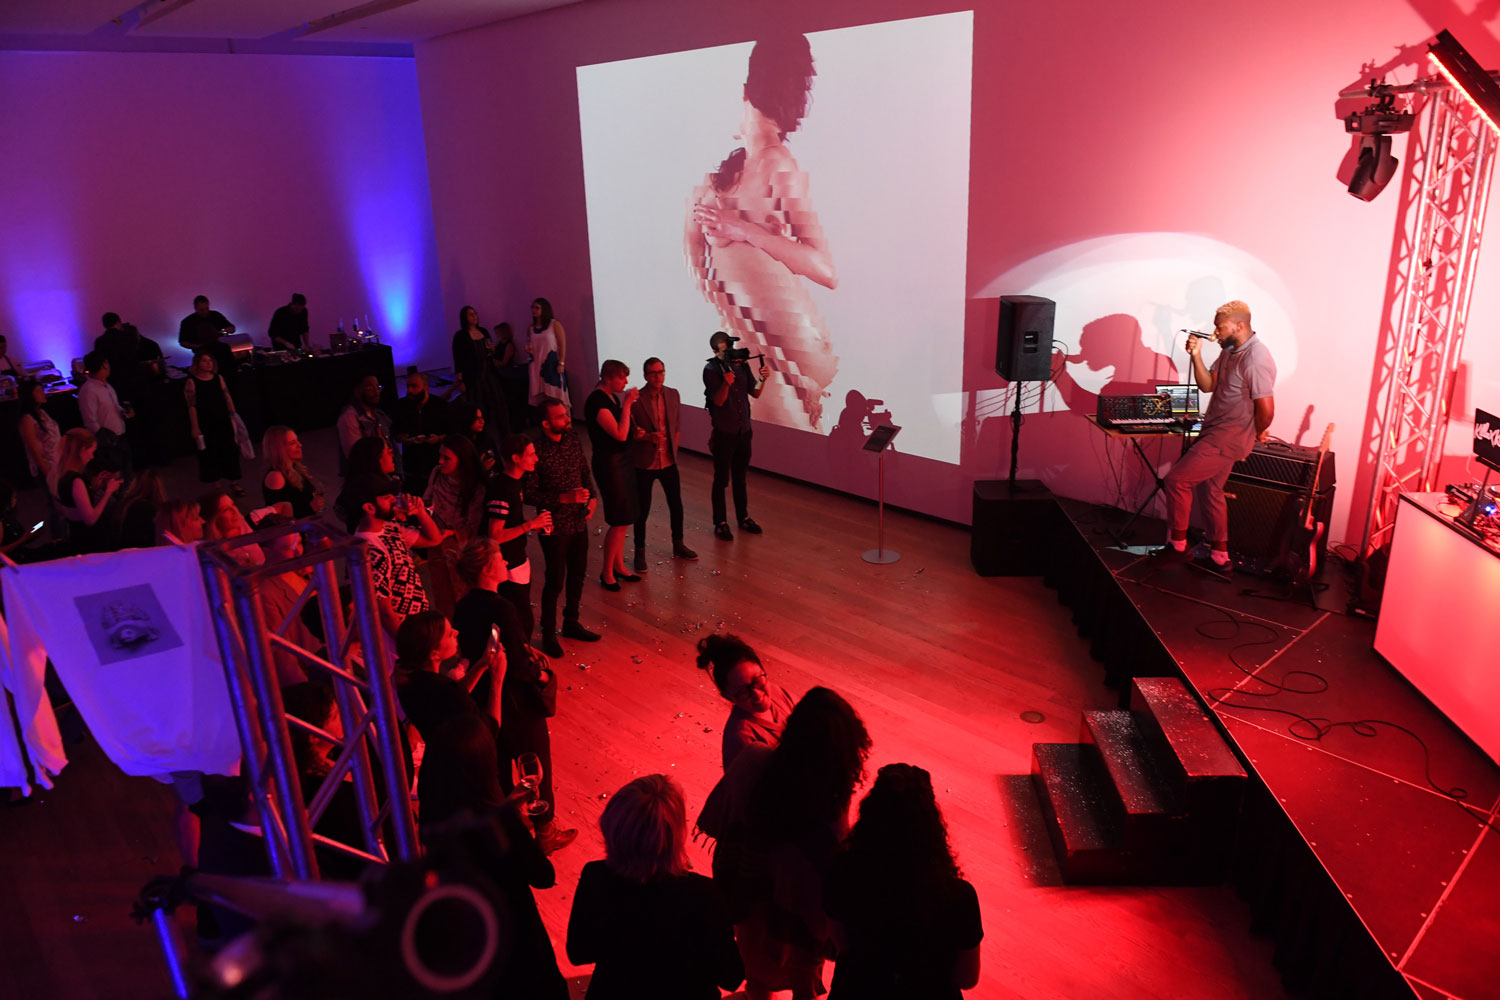 Room lit in red and purple with people watching a singer perform. There is a digital projection of a human figure on the wall.